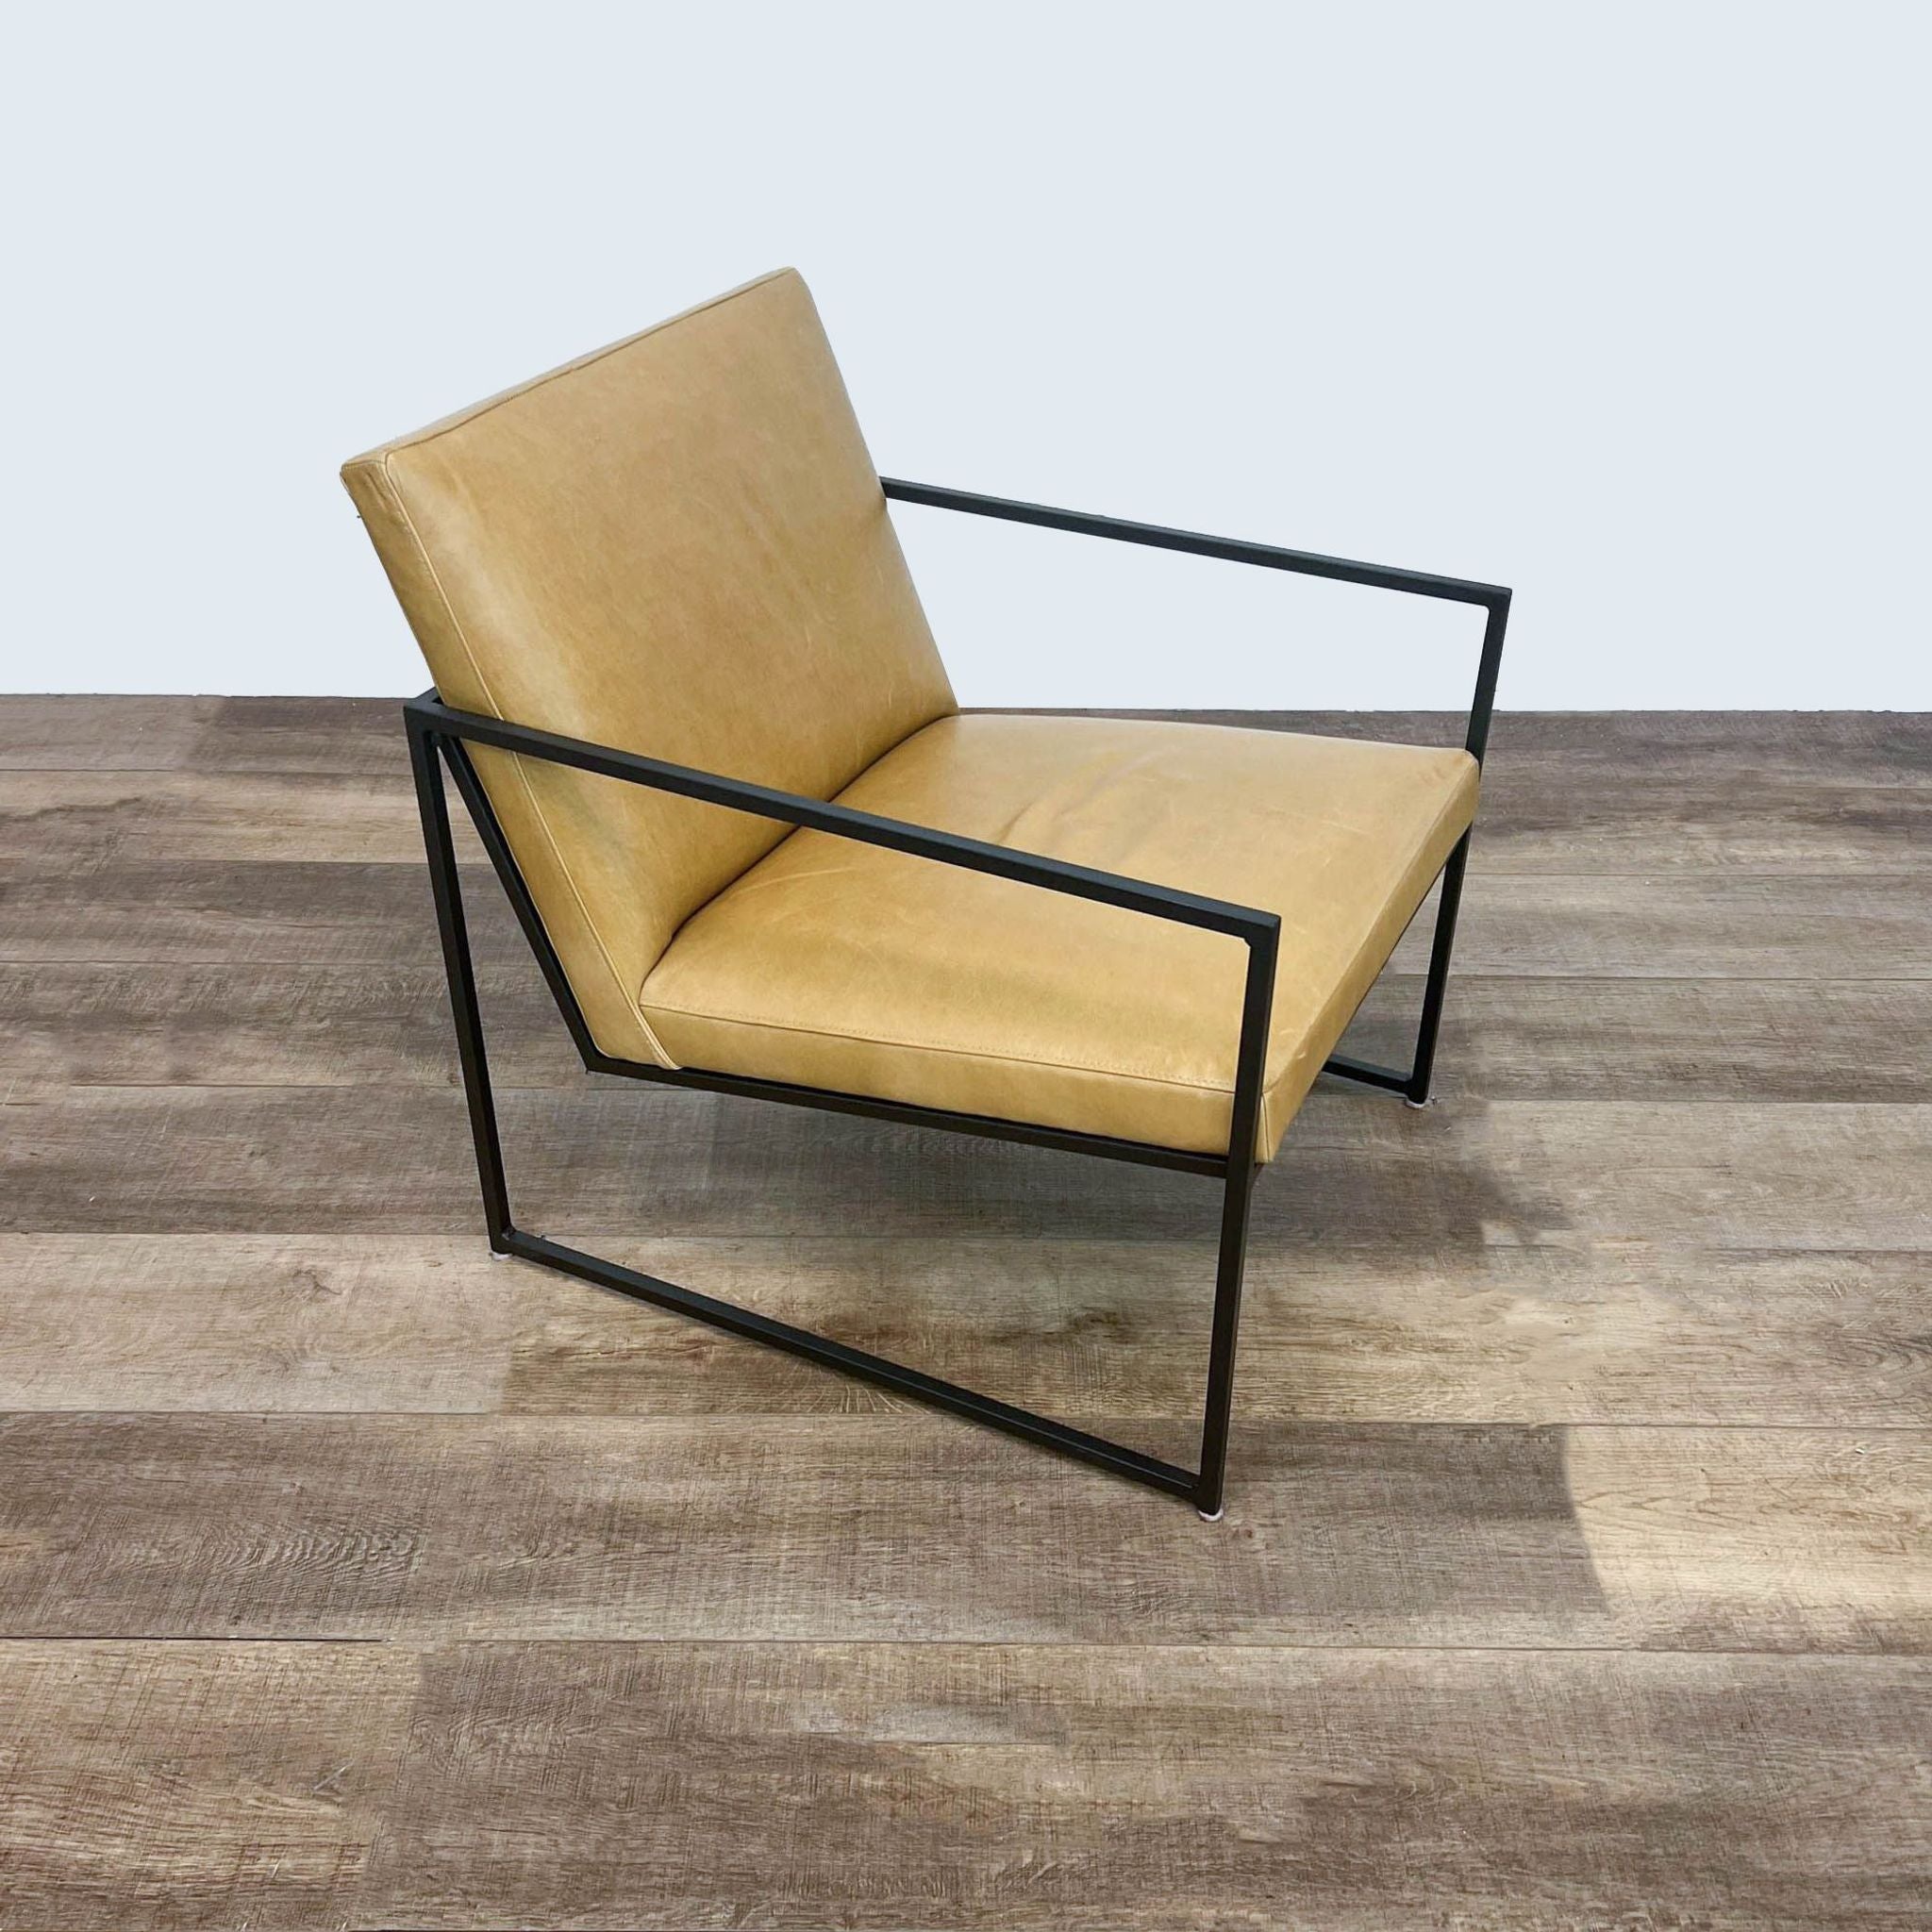 Minimalist Novato lounge chair by Room & Board featuring luxurious leather upholstery and a sleek steel frame.